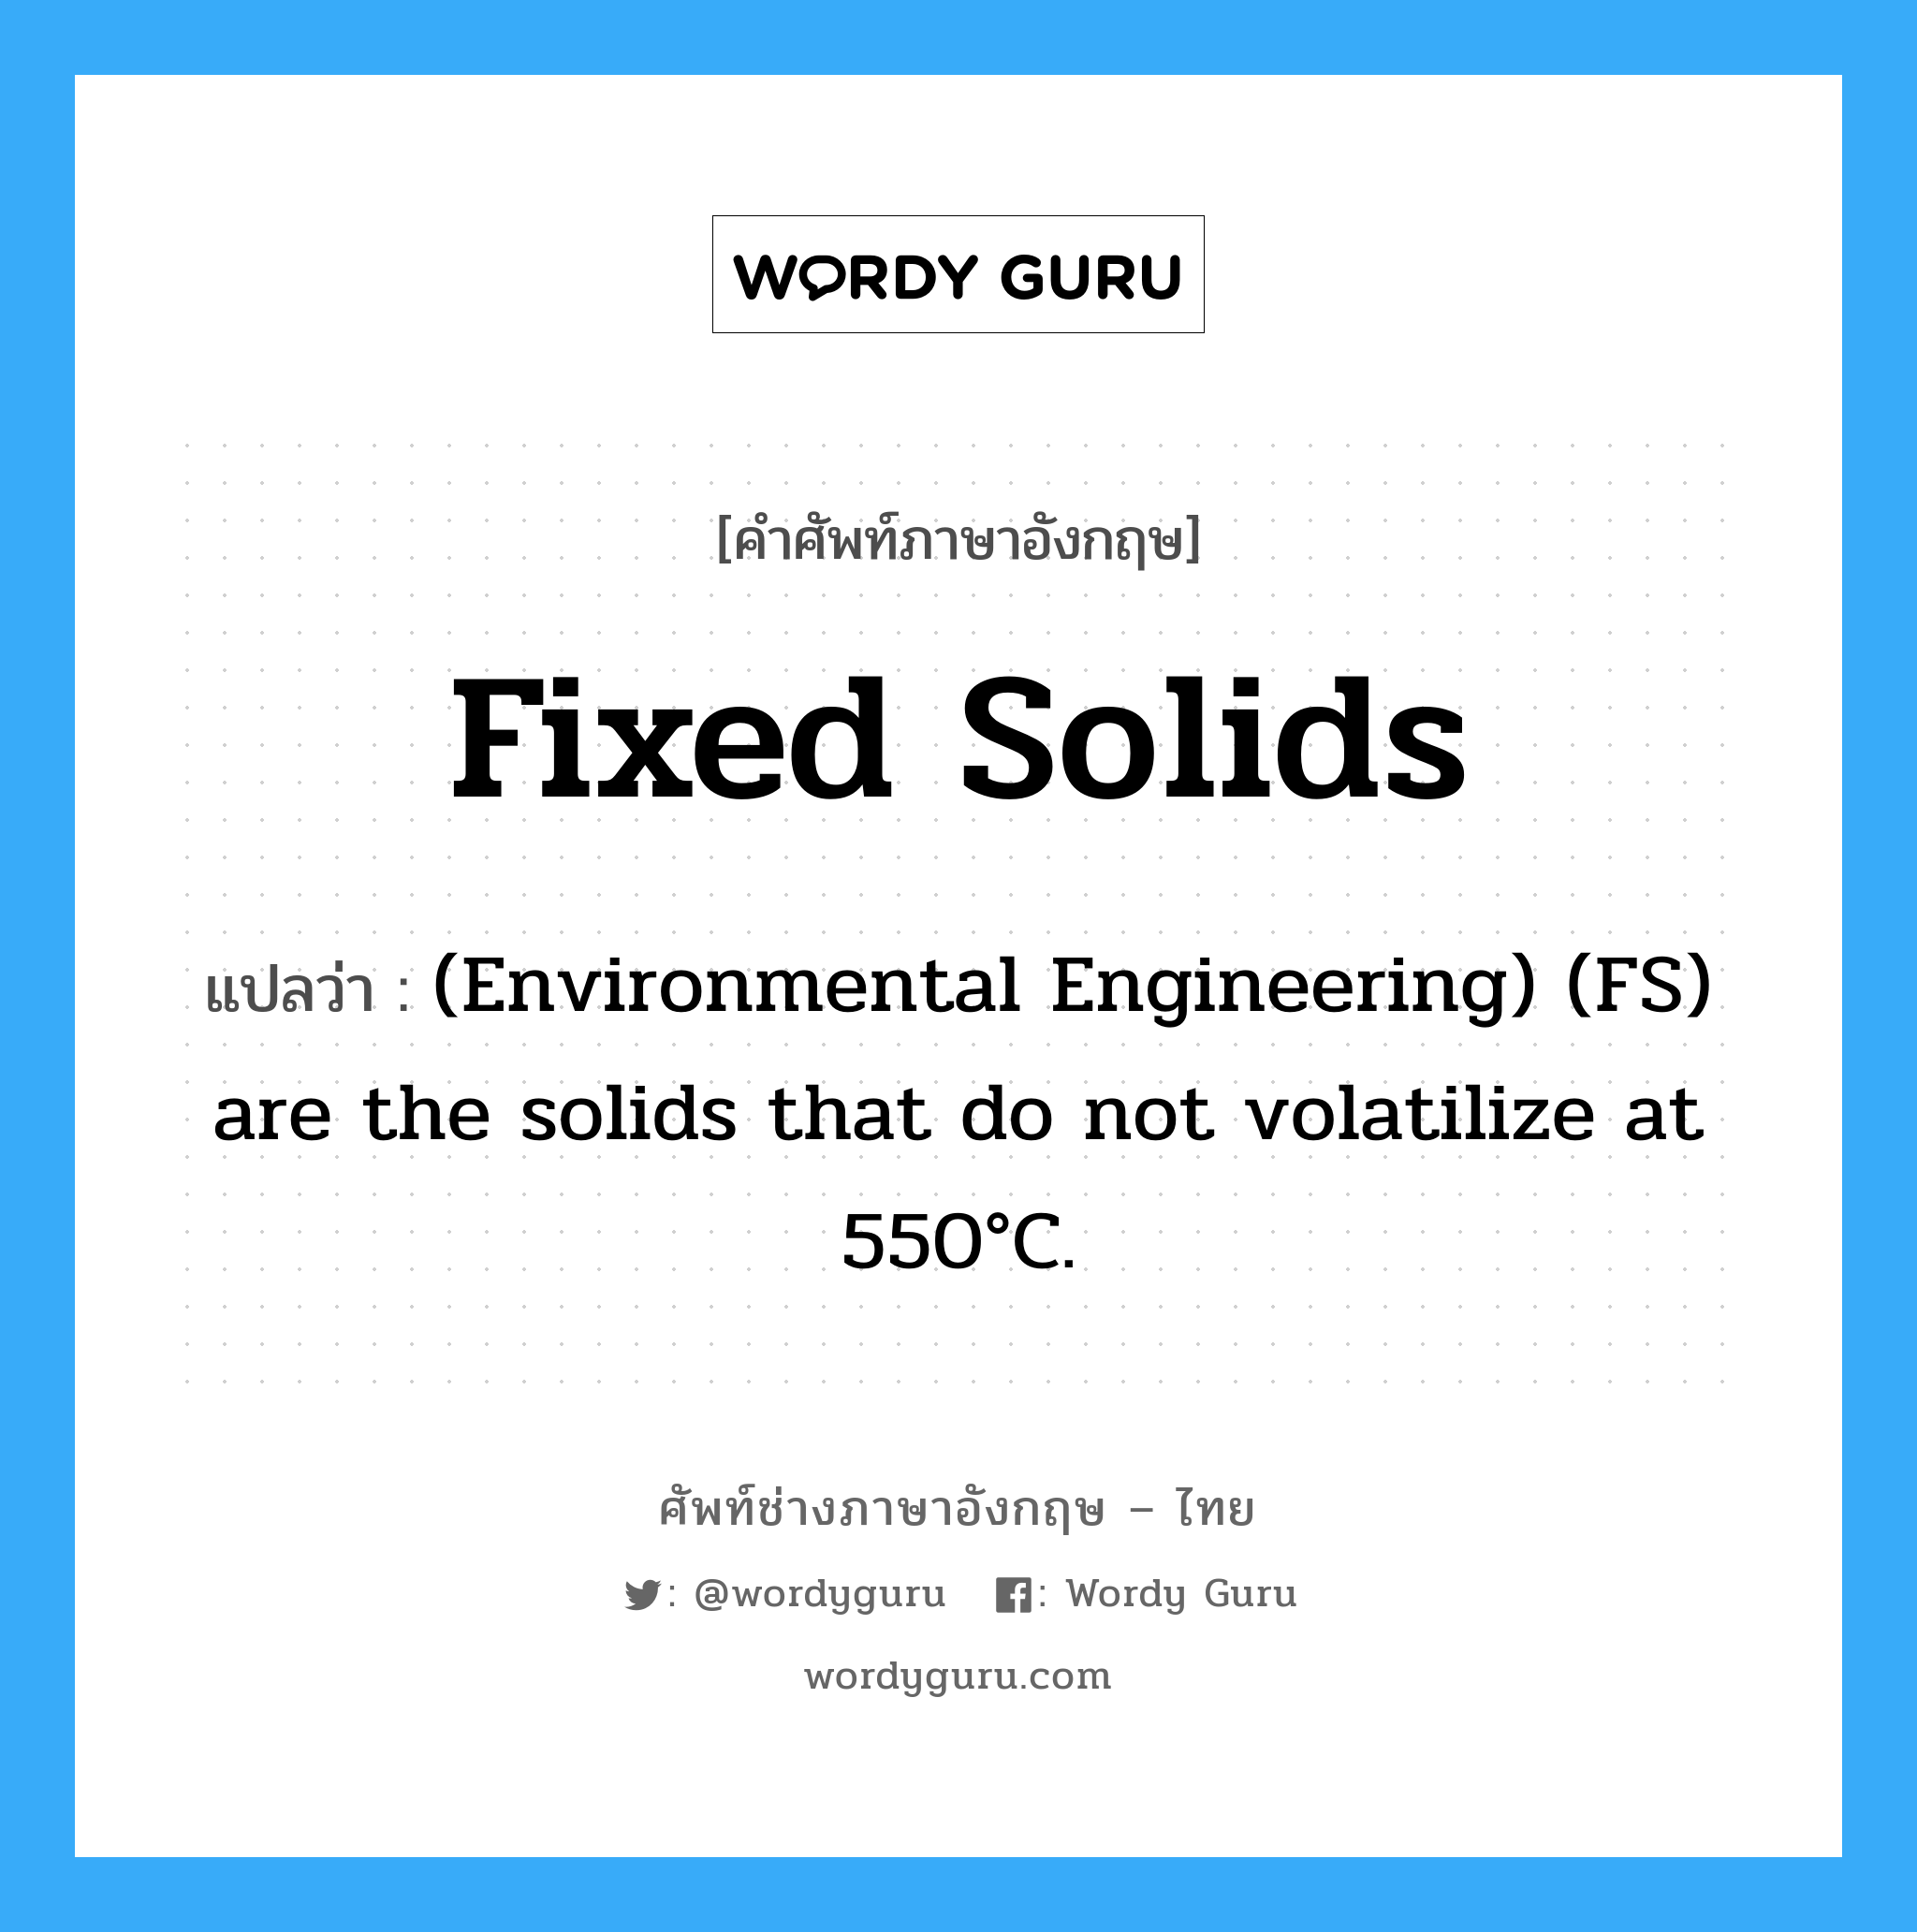 (Environmental Engineering) (FS) are the solids that do not volatilize at 550°C. ภาษาอังกฤษ?, คำศัพท์ช่างภาษาอังกฤษ - ไทย (Environmental Engineering) (FS) are the solids that do not volatilize at 550°C. คำศัพท์ภาษาอังกฤษ (Environmental Engineering) (FS) are the solids that do not volatilize at 550°C. แปลว่า Fixed solids